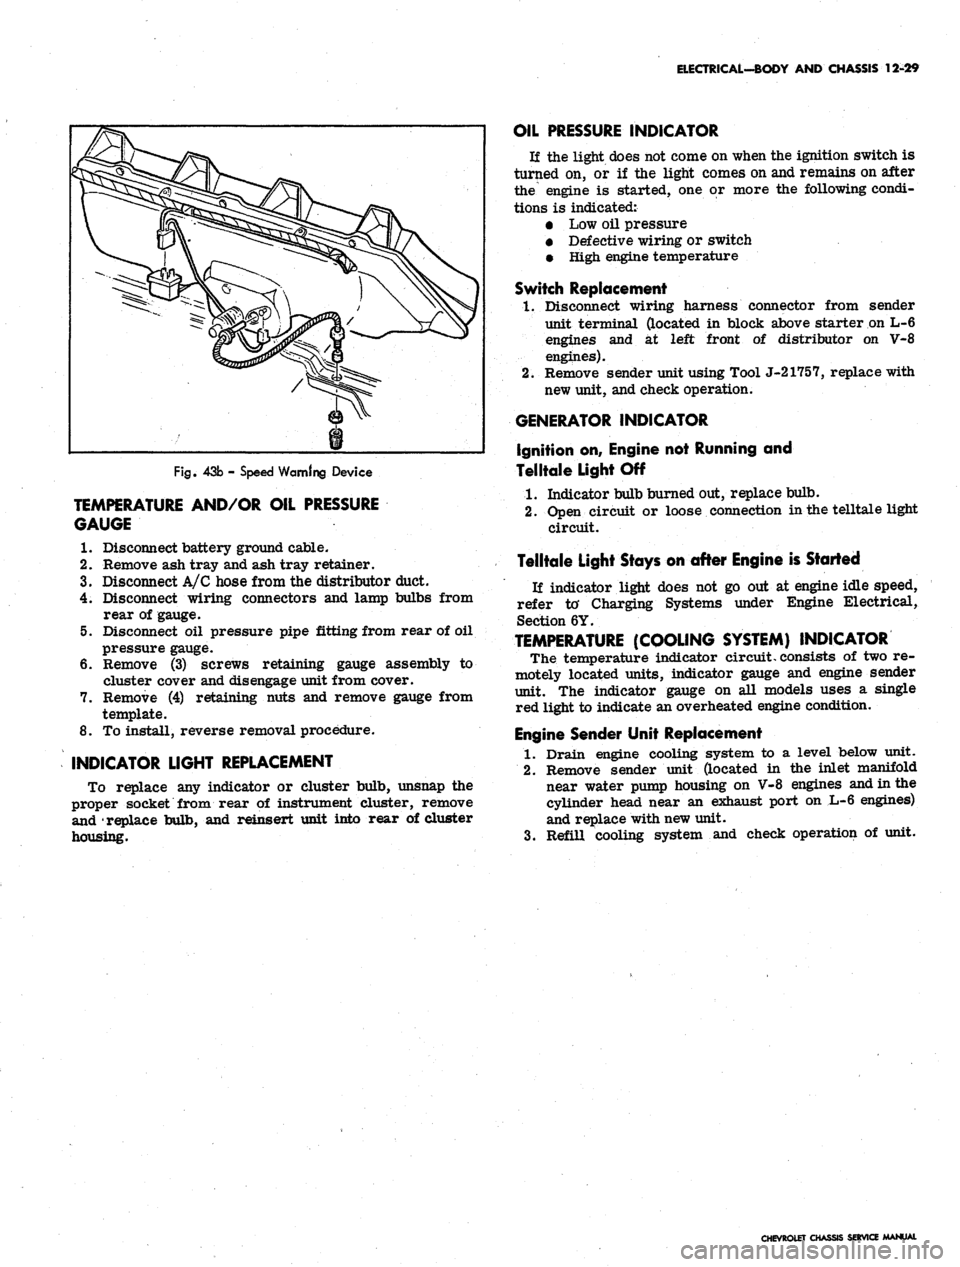 CHEVROLET CAMARO 1967 1.G Chassis Workshop Manual 
ELECTRICAL-BODY AND CHASSIS 12-29

Fig.
 43b - Speed Warning Device

TEMPERATURE AND/OR OIL PRESSURE

GAUGE

1.
 Disconnect battery ground cable.

2.
 Remove ash tray and ash tray retainer.

3.
 Disc